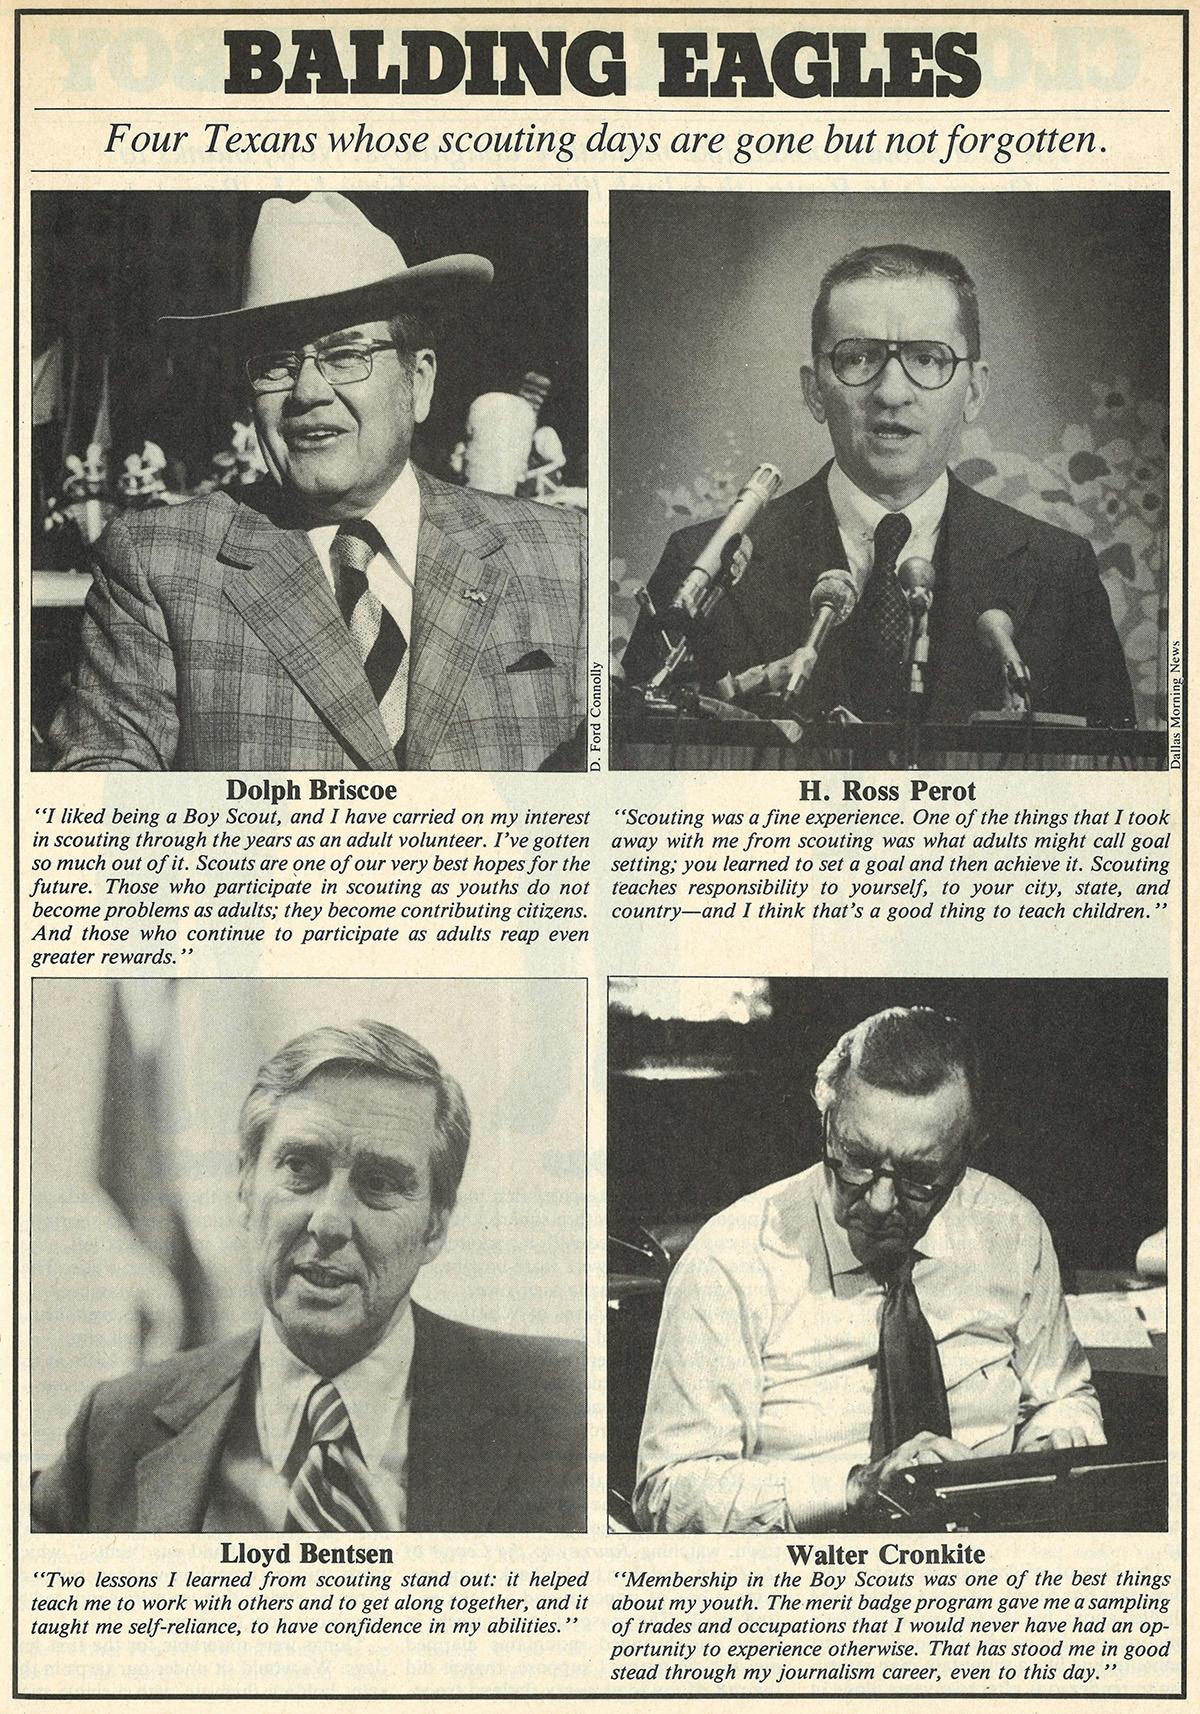 Newspaper article titled "Balding Eagles," with photographs of Dolph Briscoe, H. Ross Perot, Lloyd Bentsen, and Walter Cronkite. 